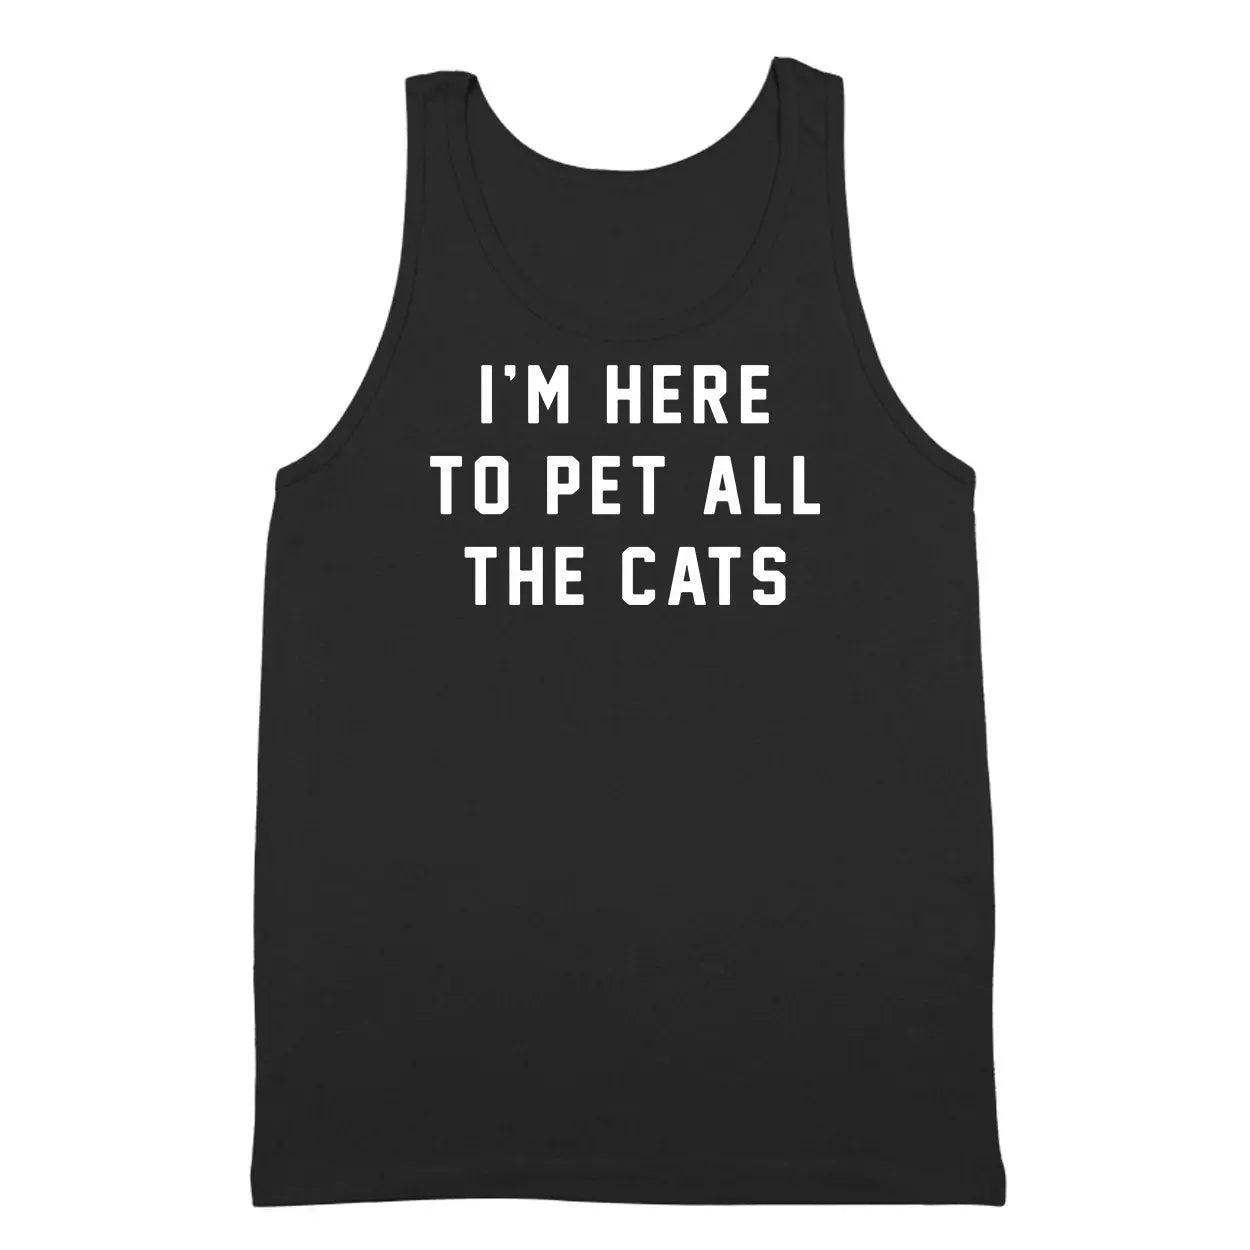 I'm Here To Pet All The Cats Tshirt - Donkey Tees